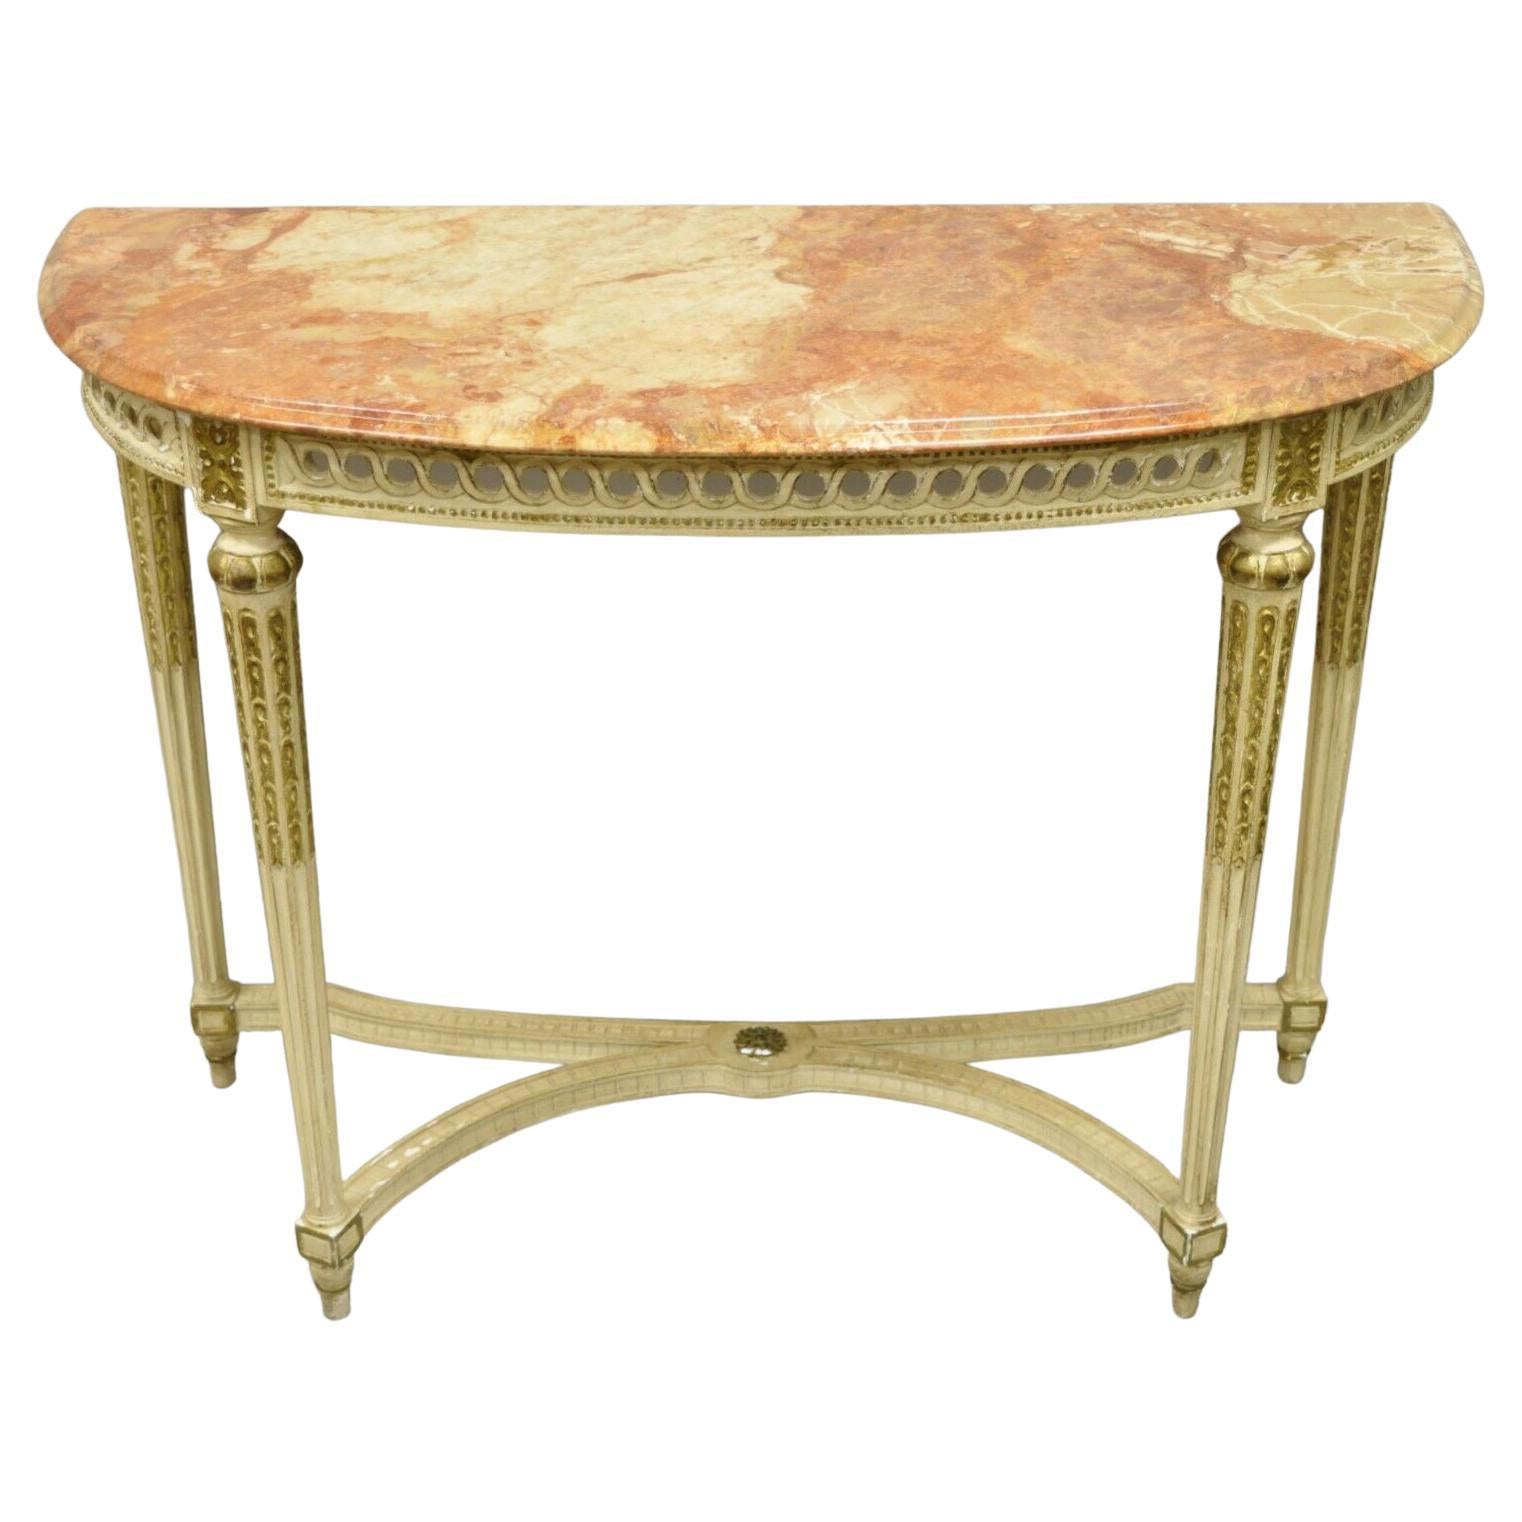 Vintage French Louis XVI Italian Pink Marble Top Demilune Console Hall Table For Sale